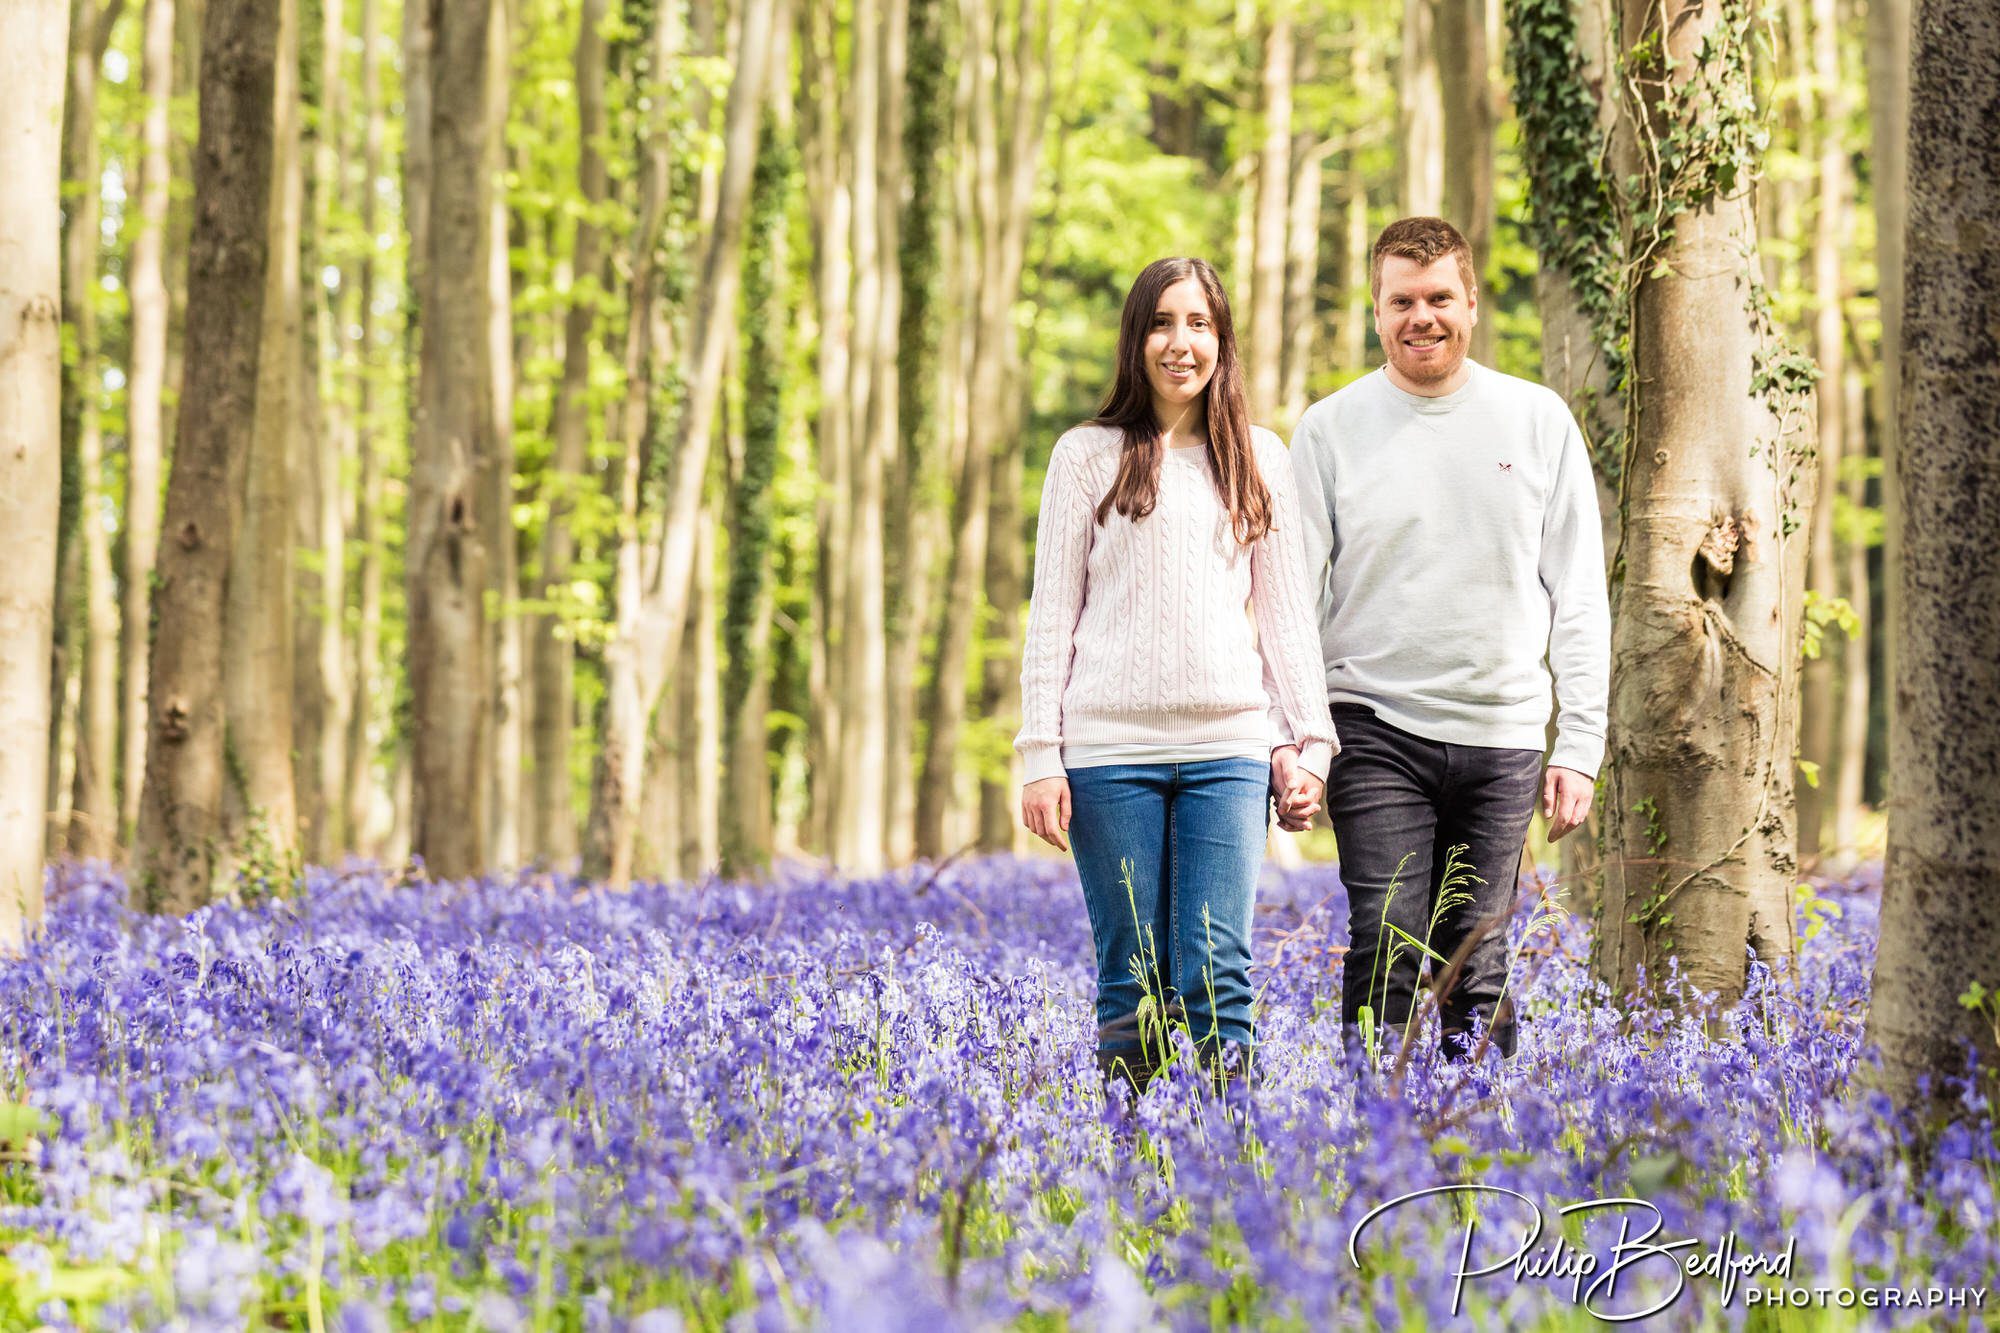 Man & Woman amongst Bluebells on a Engagement Shoot near Worthing, West Sussex